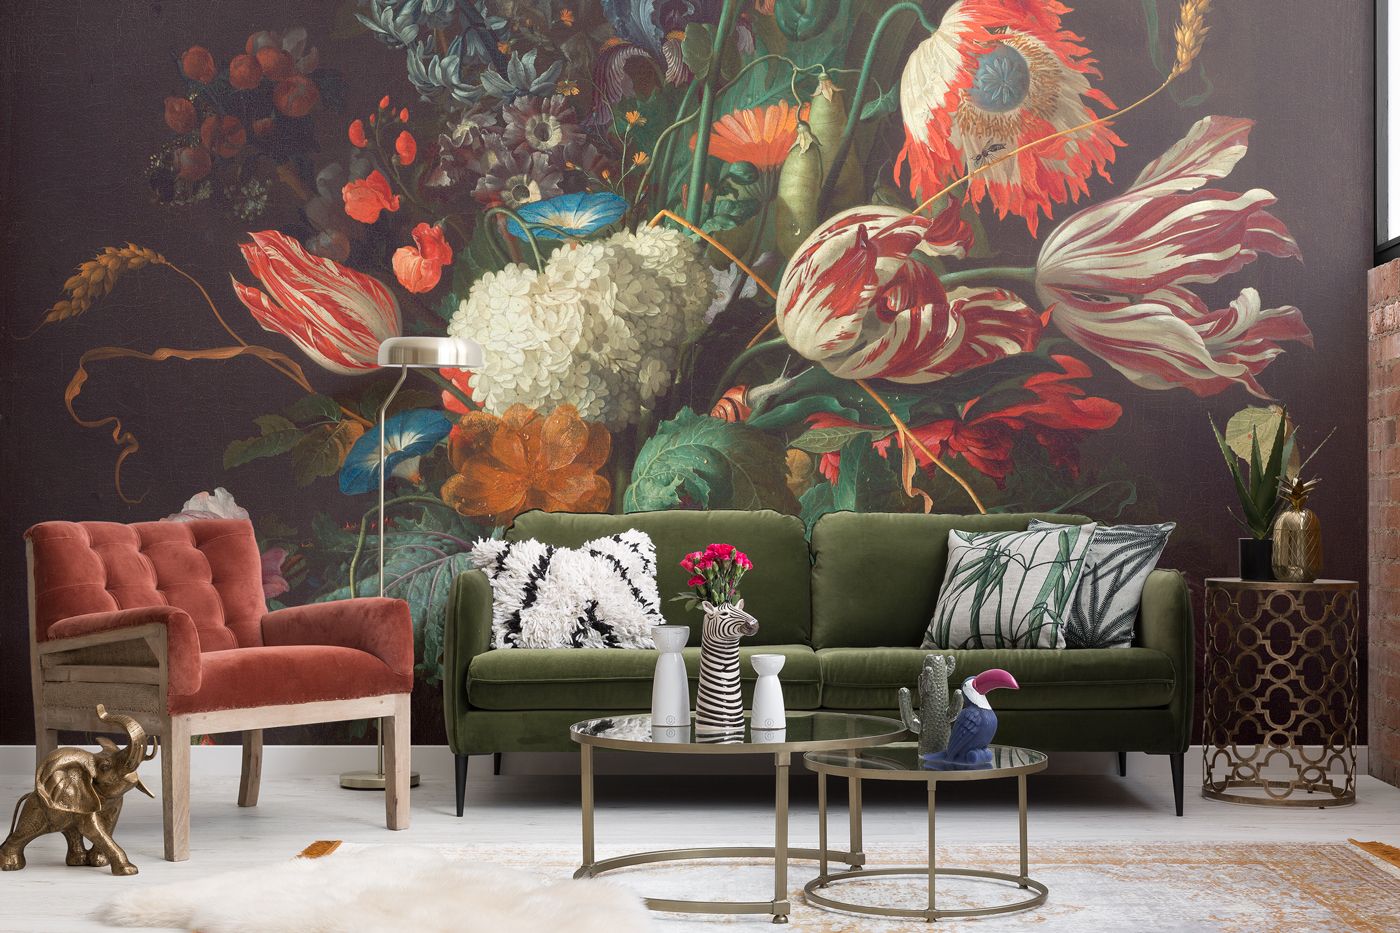 An example of maximalist design in the home, a style made up of mixed patters, saturated colors, and bold choices. Image from House Beautiful. 